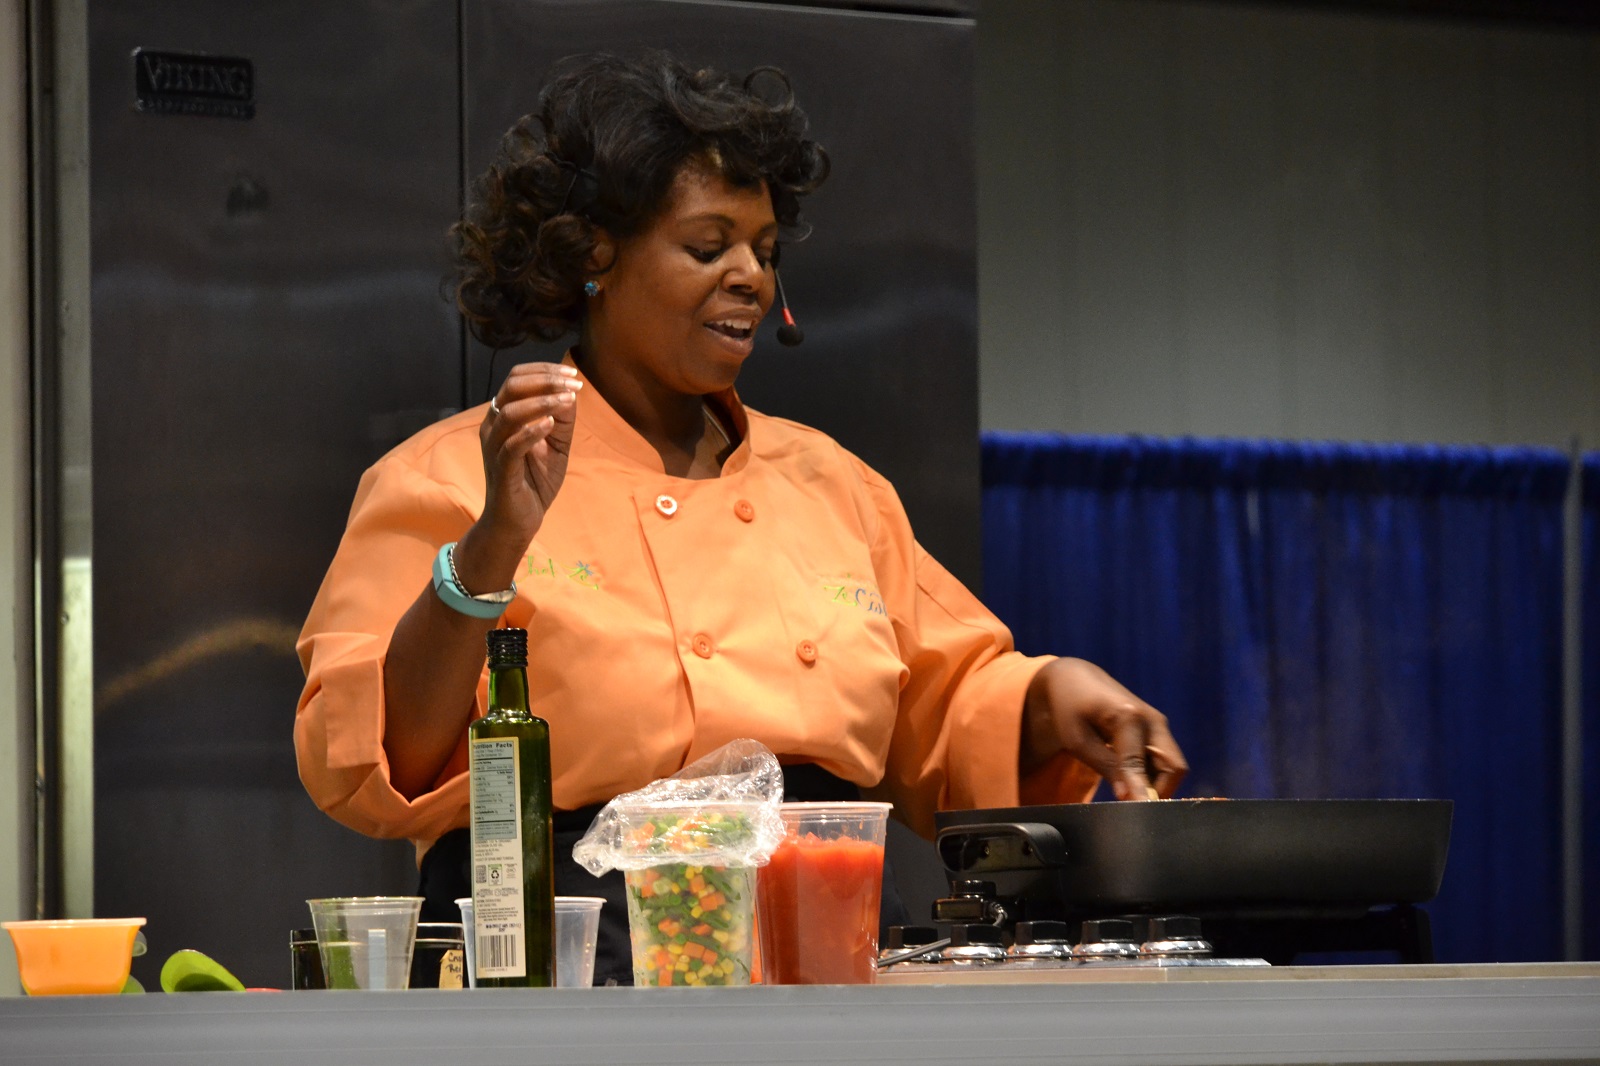 Culinary Demonstrations at the Michigan International Women’s Show